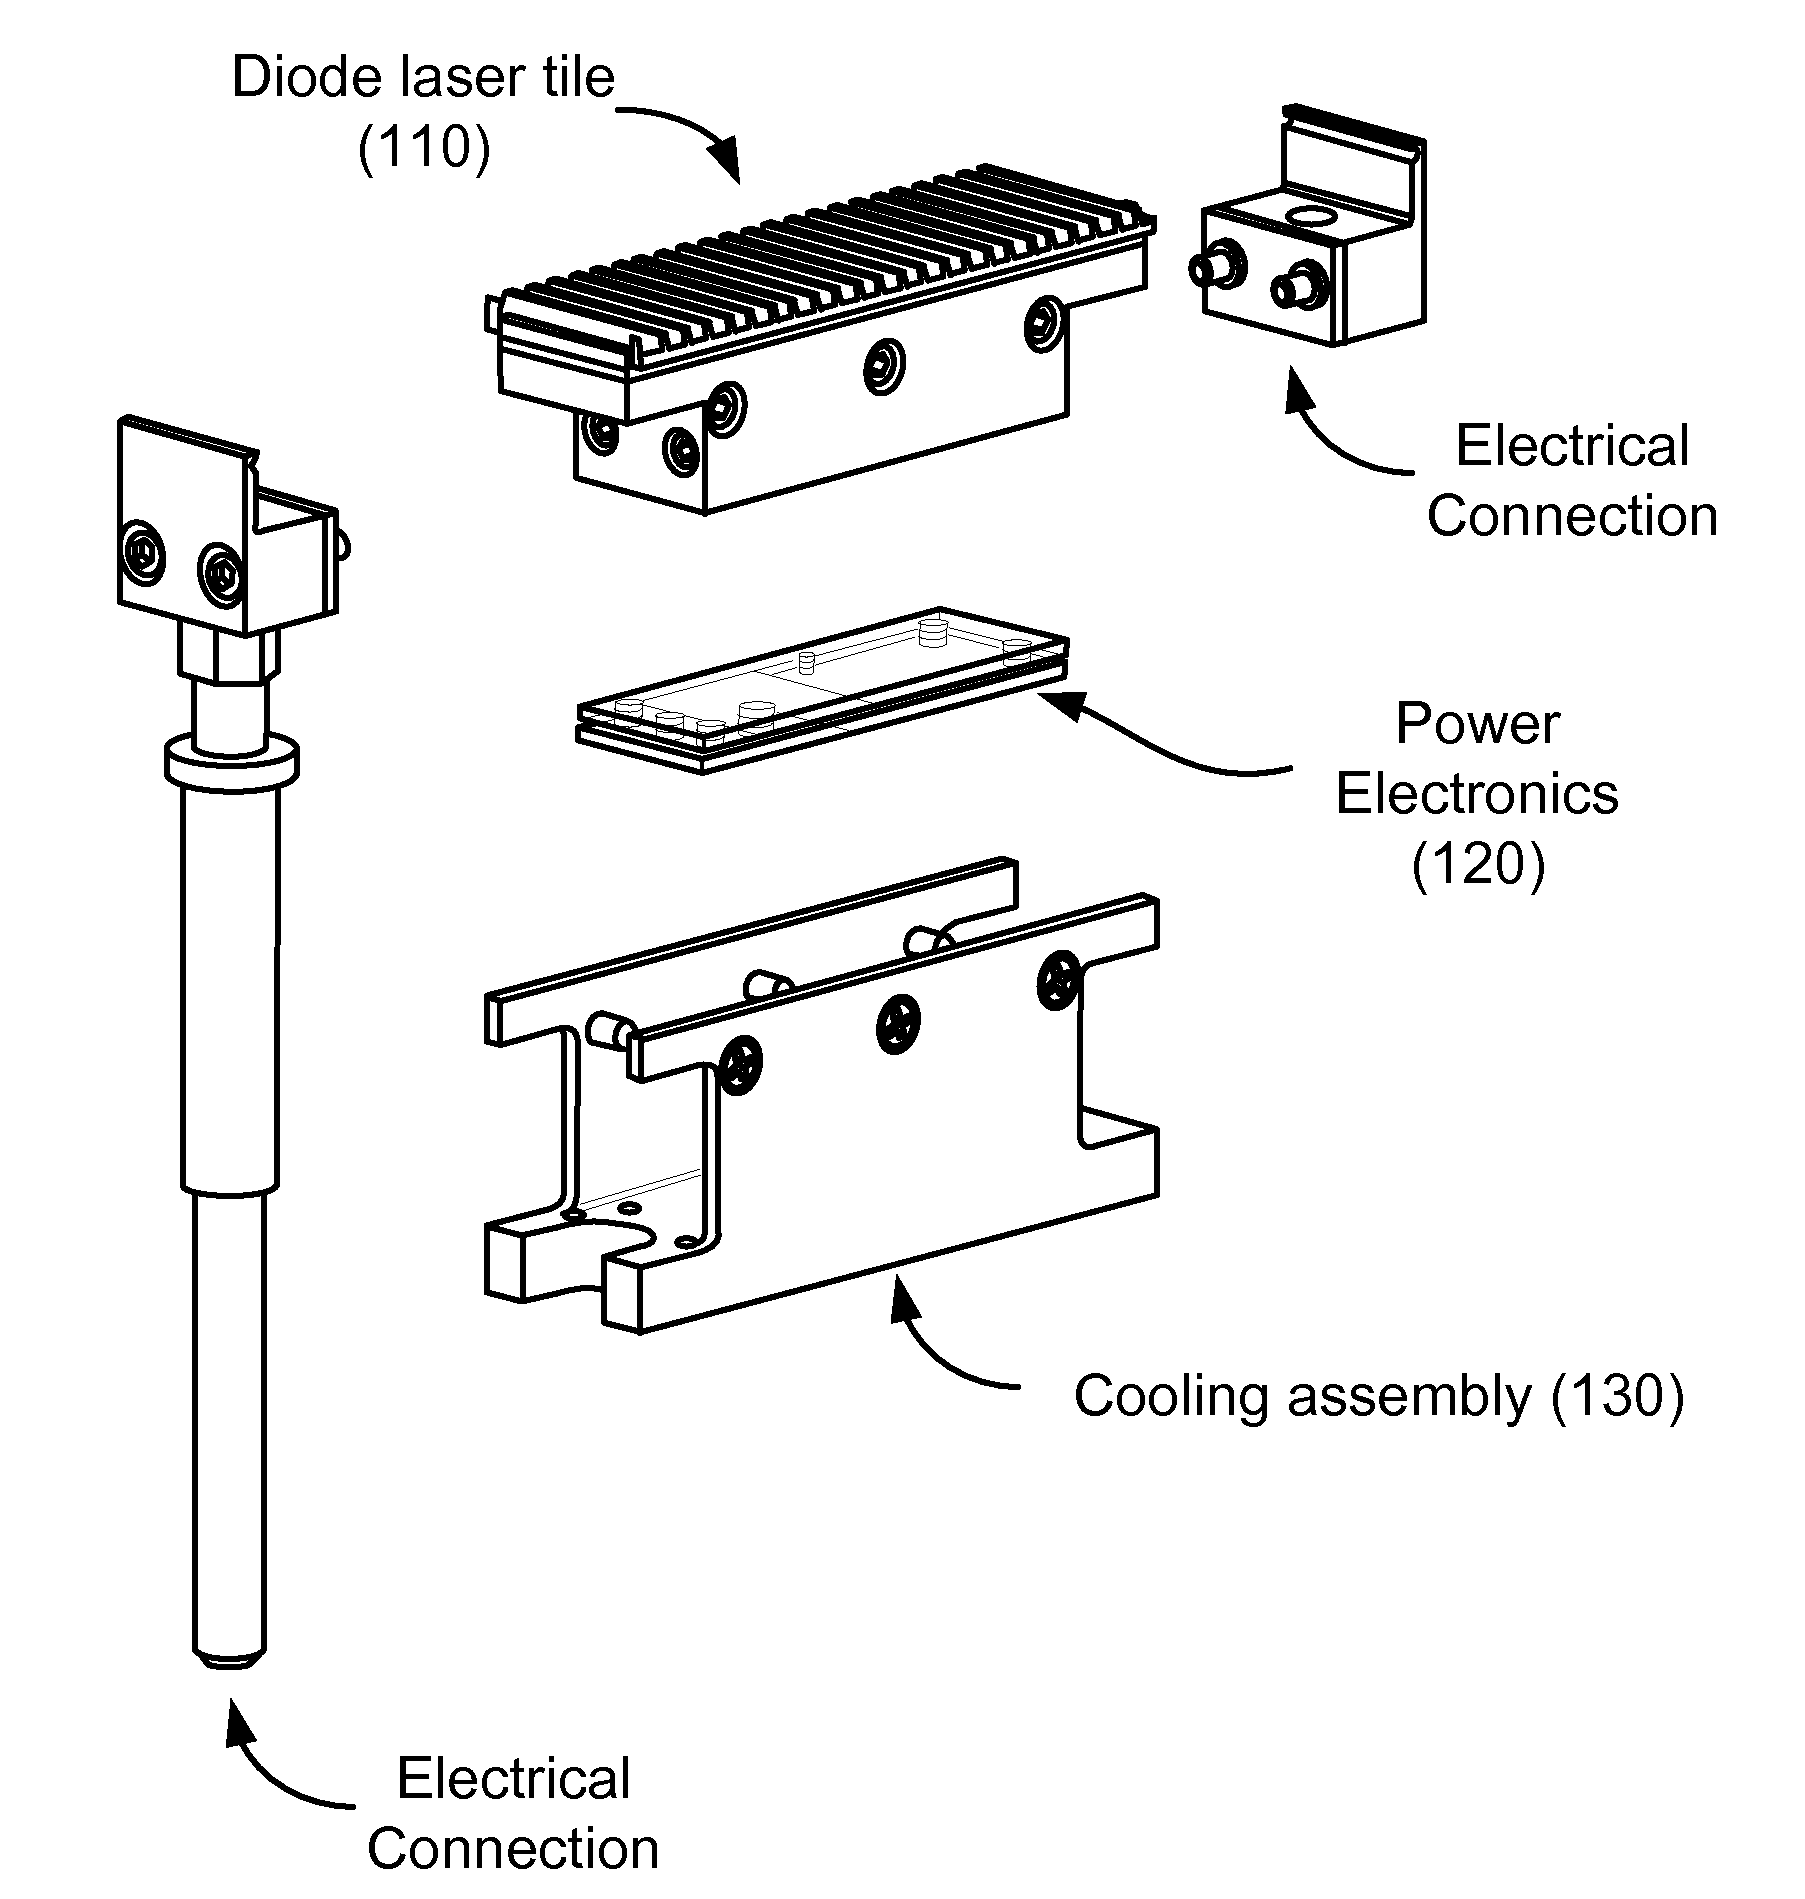 Method and system for powering and cooling semiconductor lasers